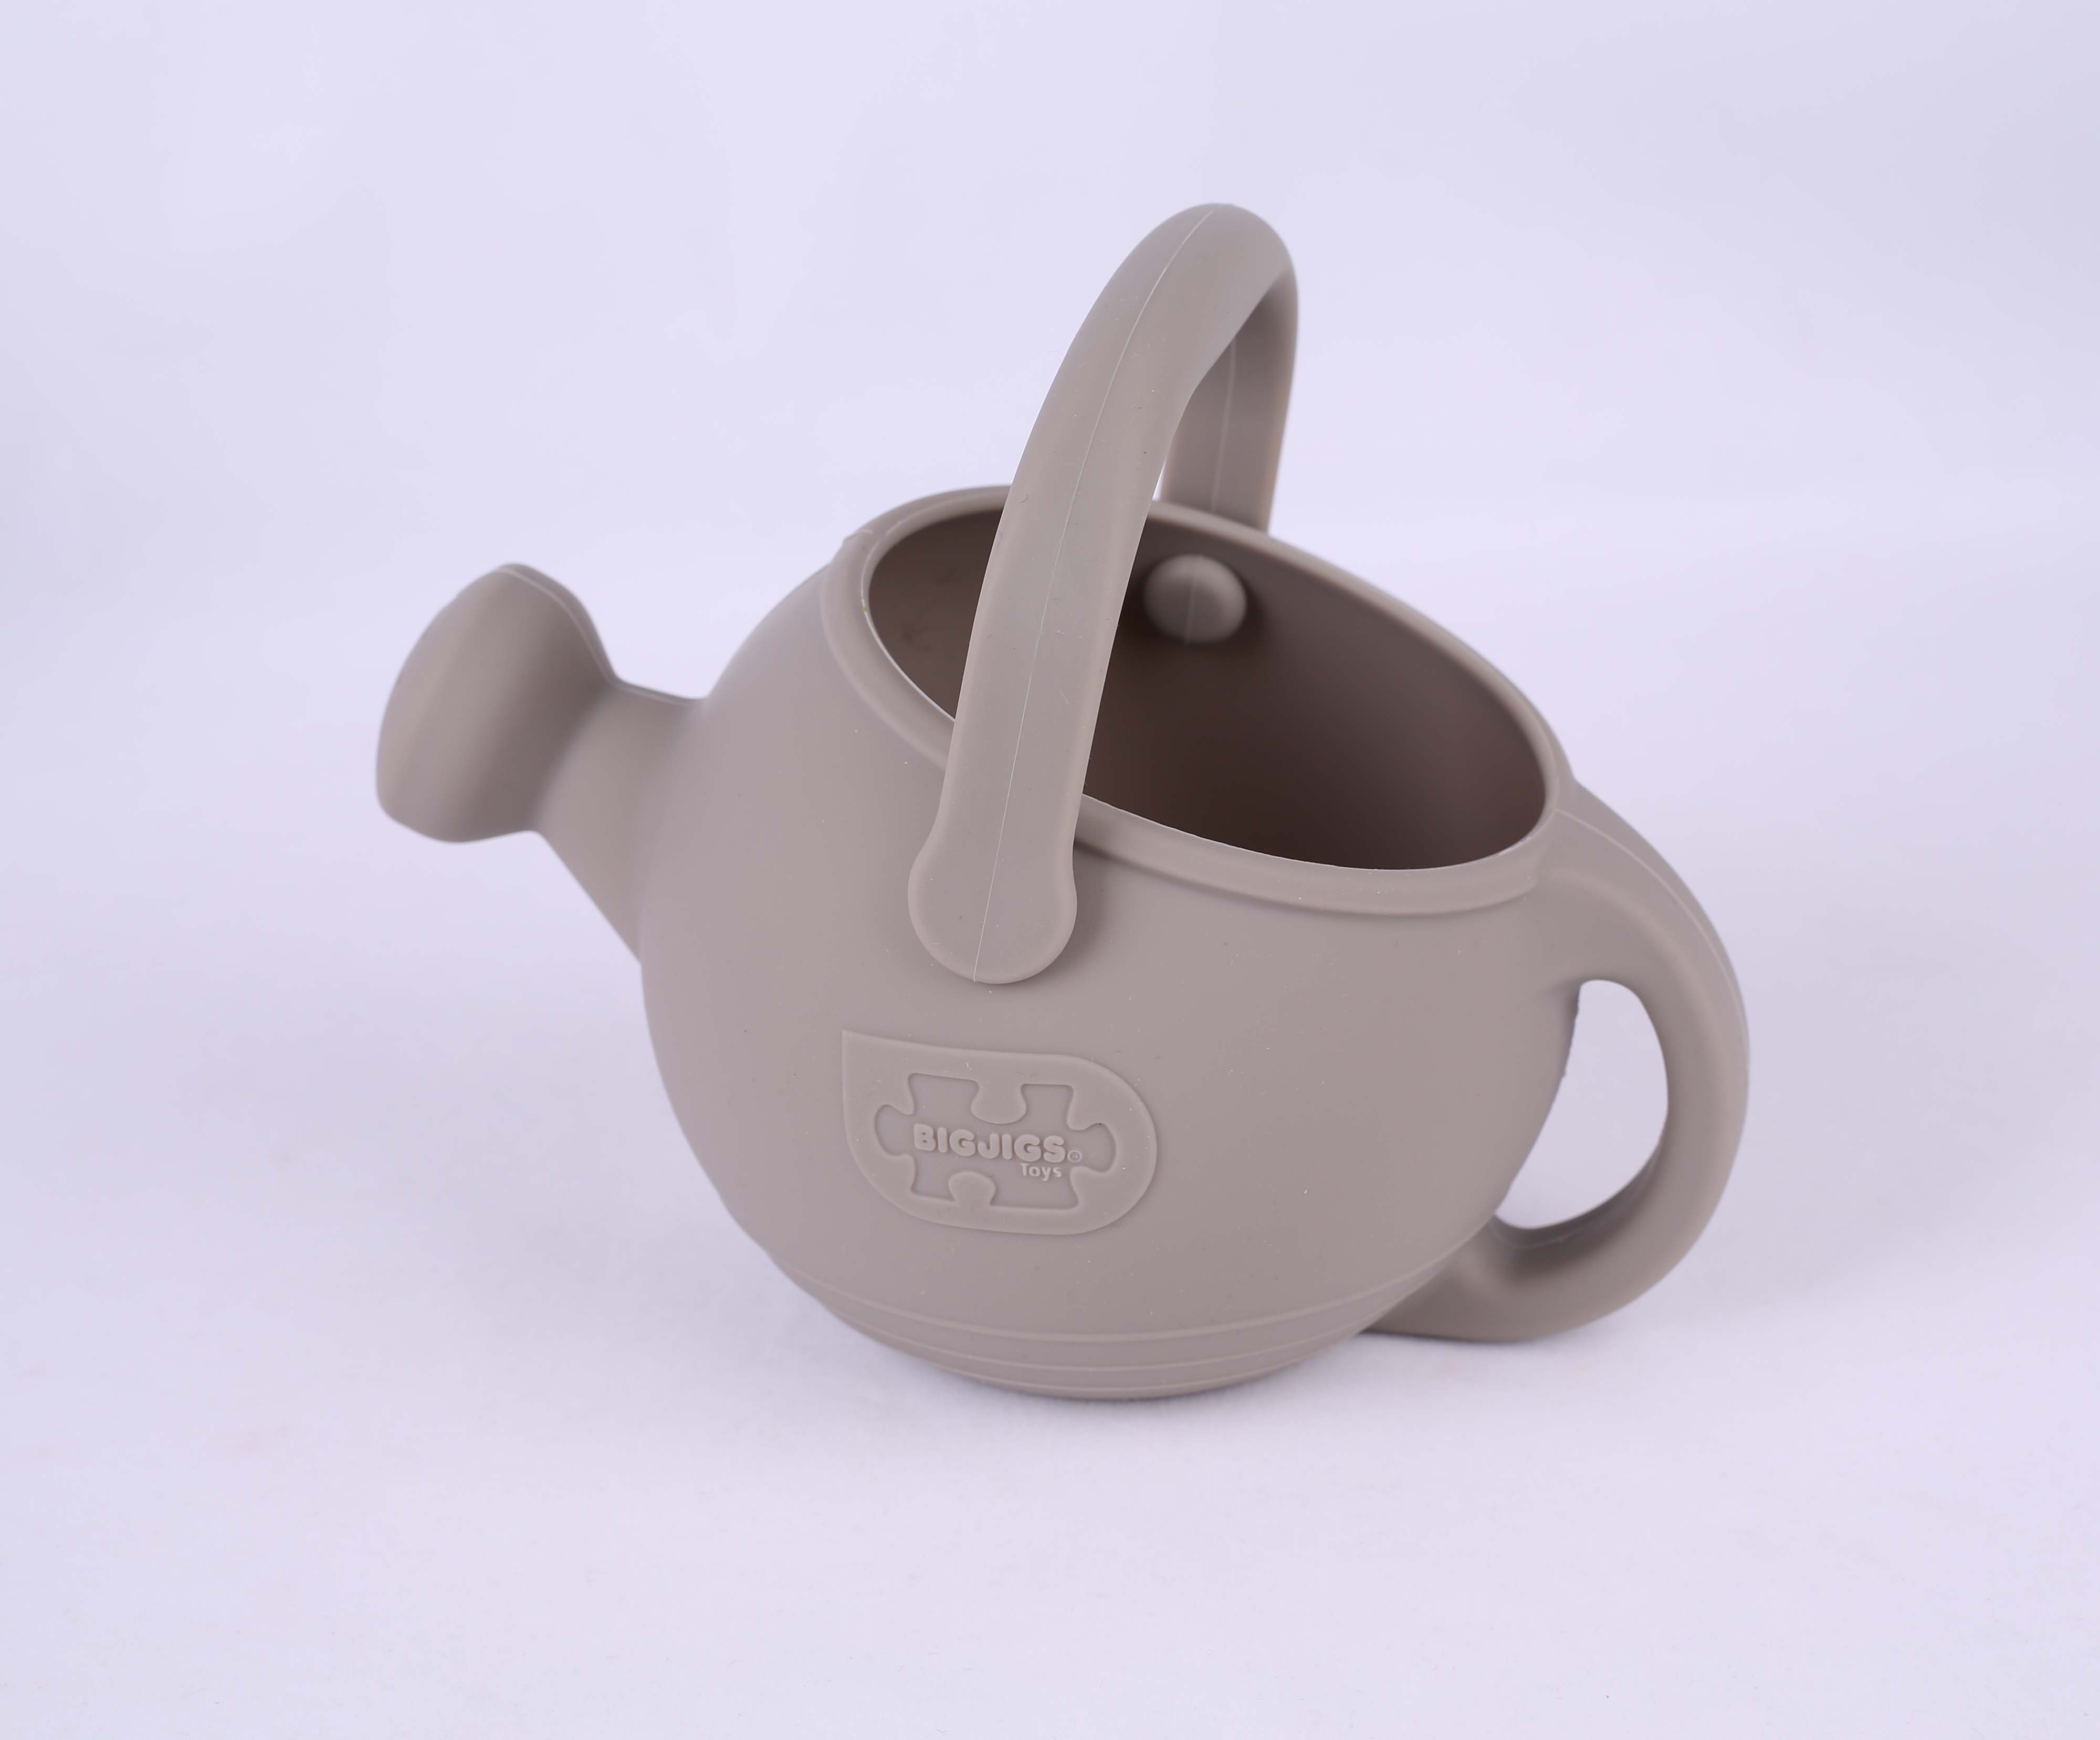 Silicone Watering Can Grey